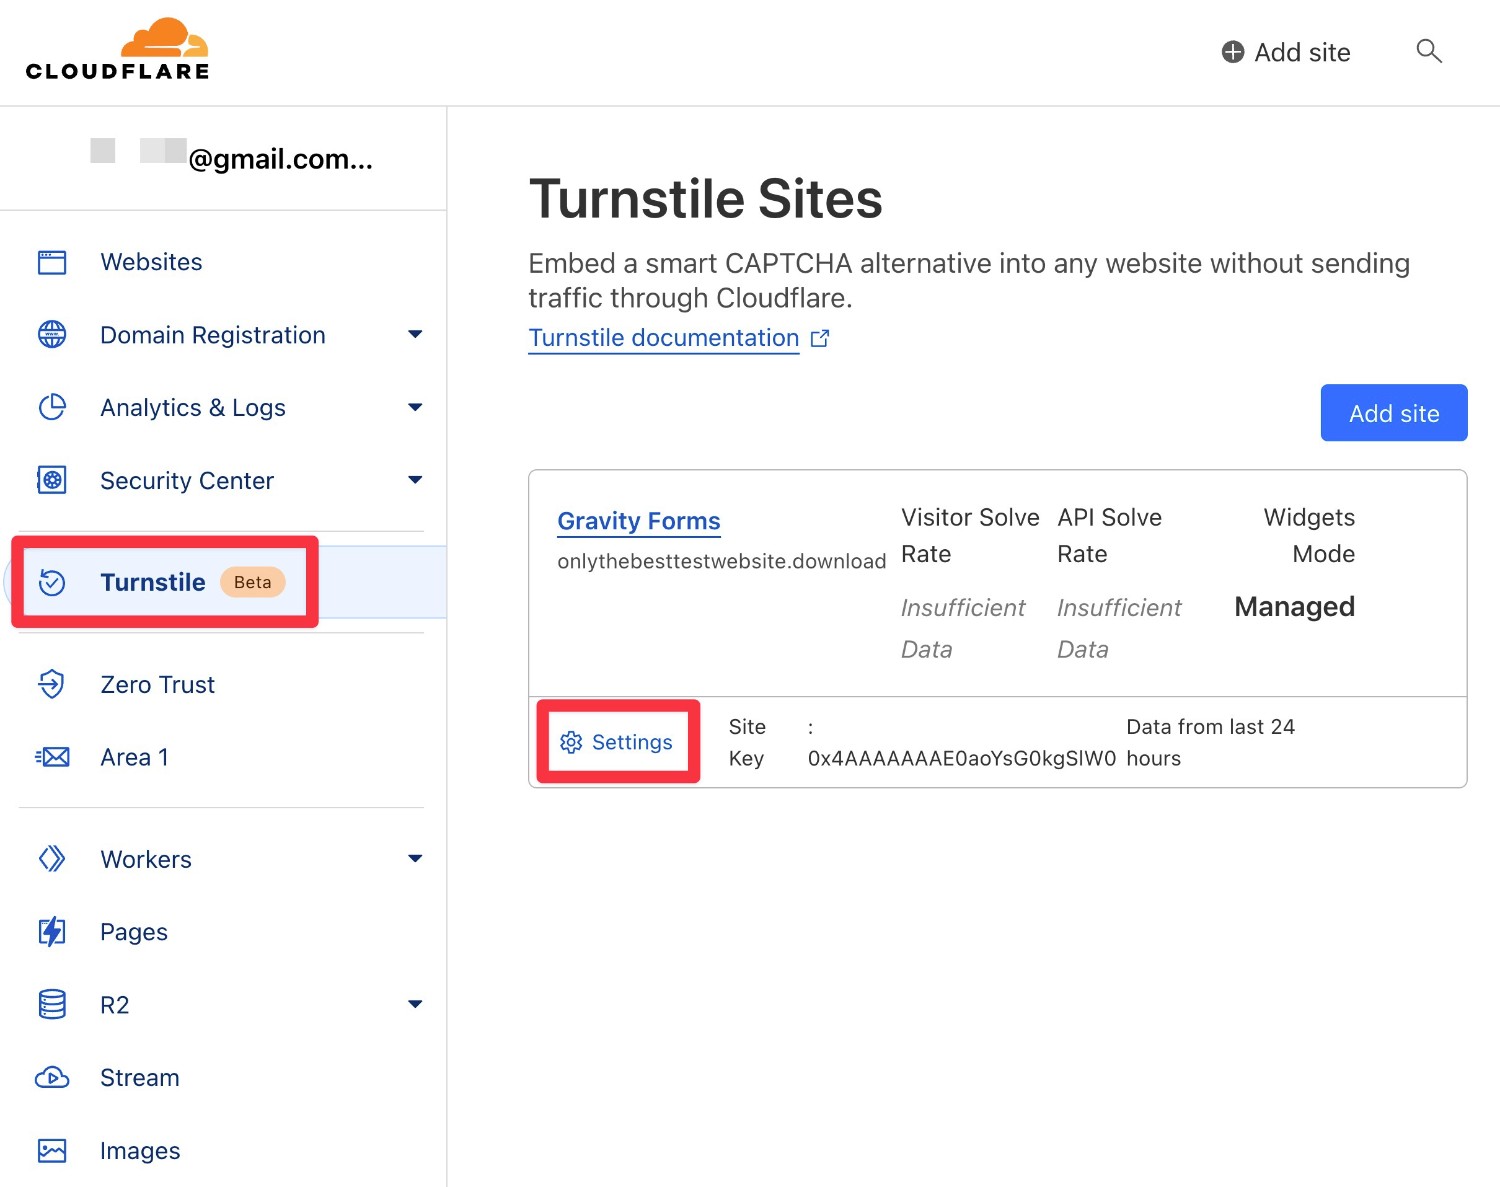 How to edit Cloudflare Turnstile site